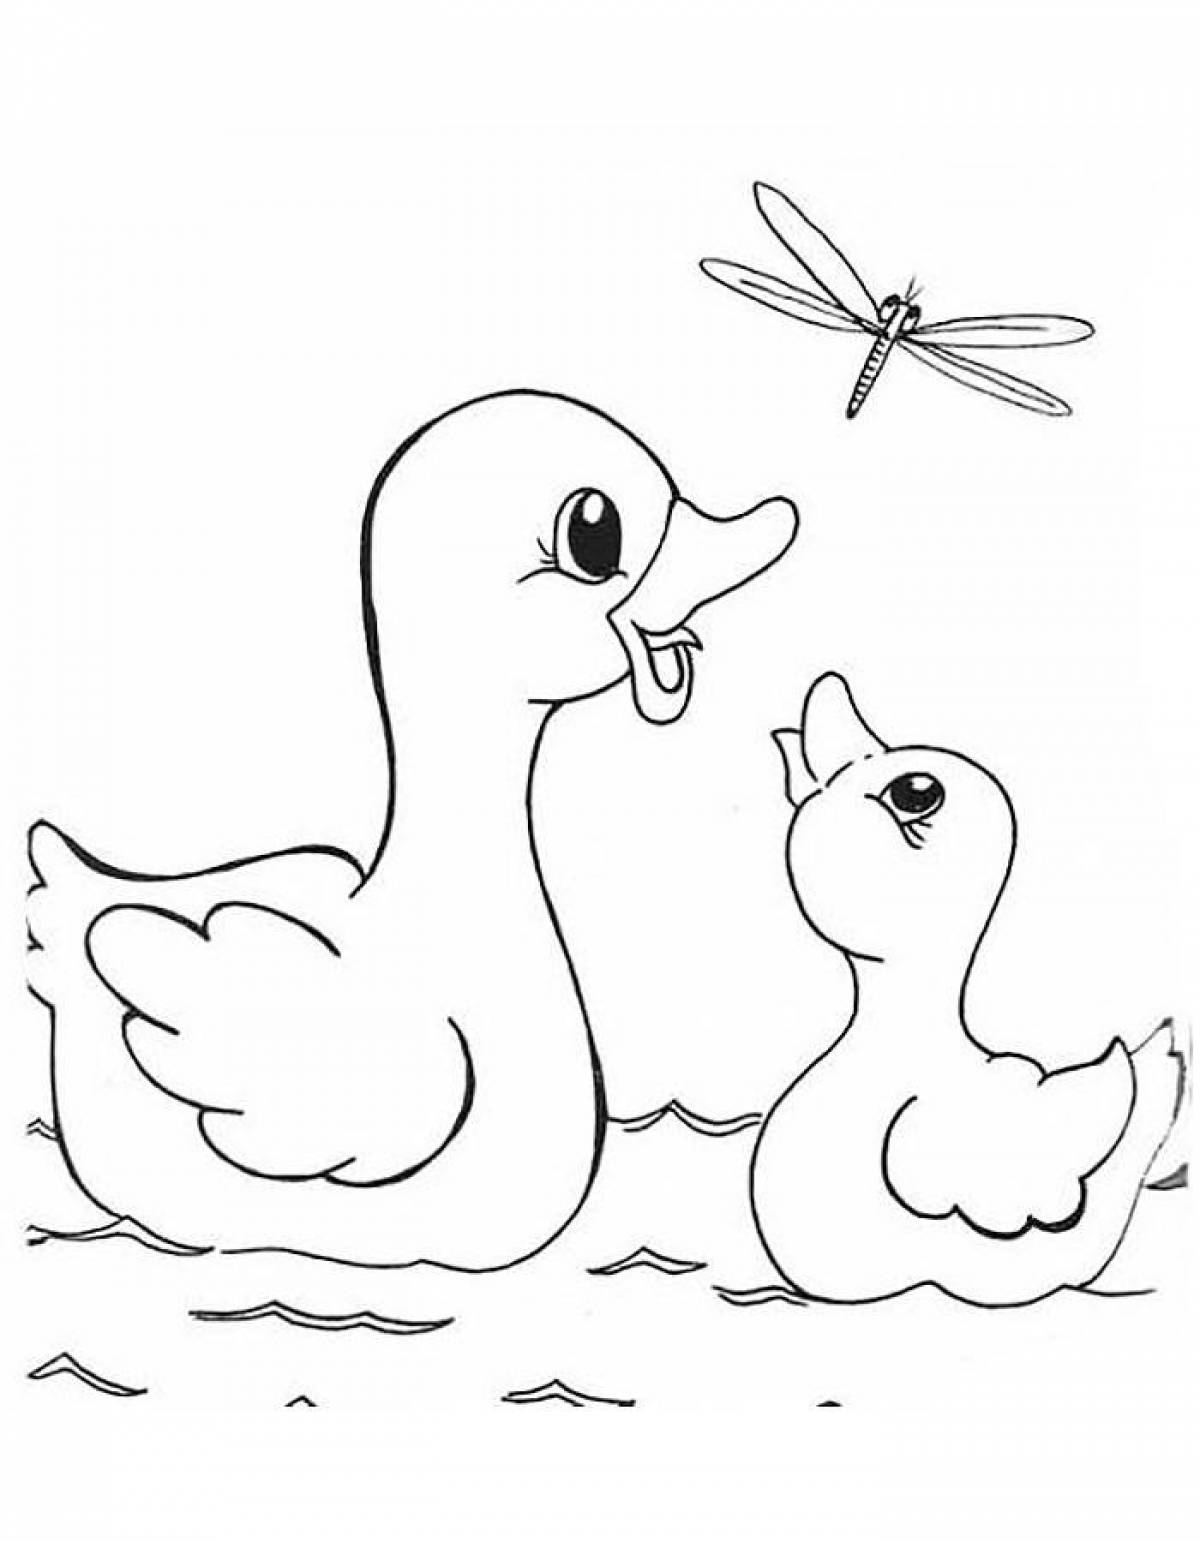 Glorious duckling coloring for children